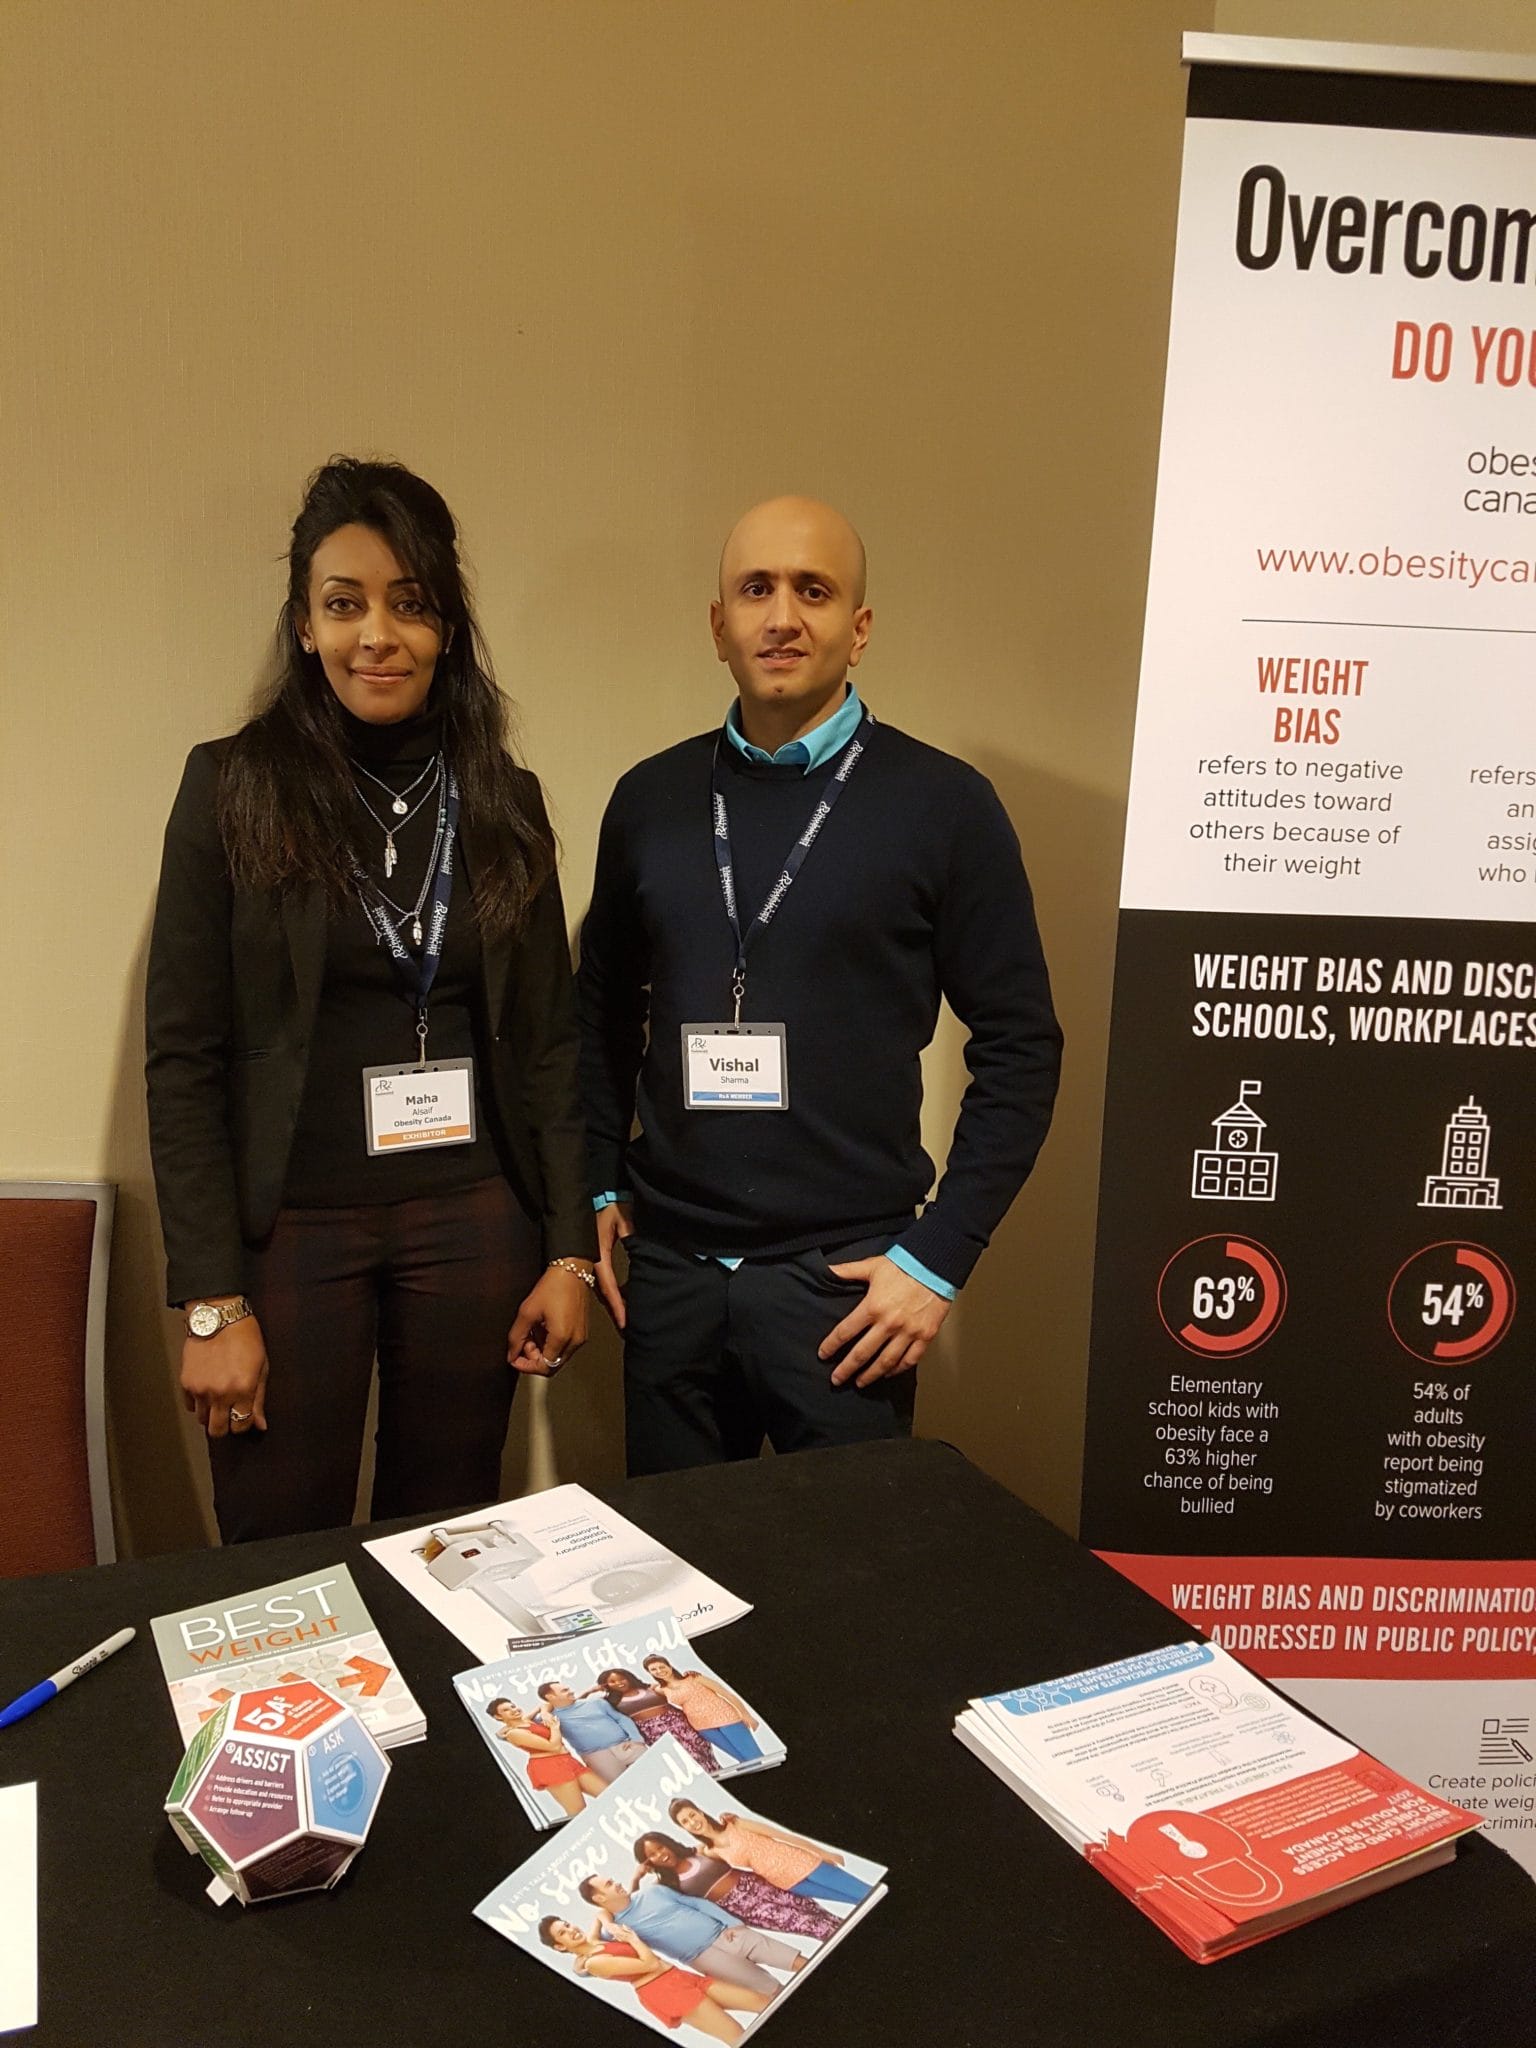 Two people standing at a conference booth with informational materials and banners on weight bias and discrimination.